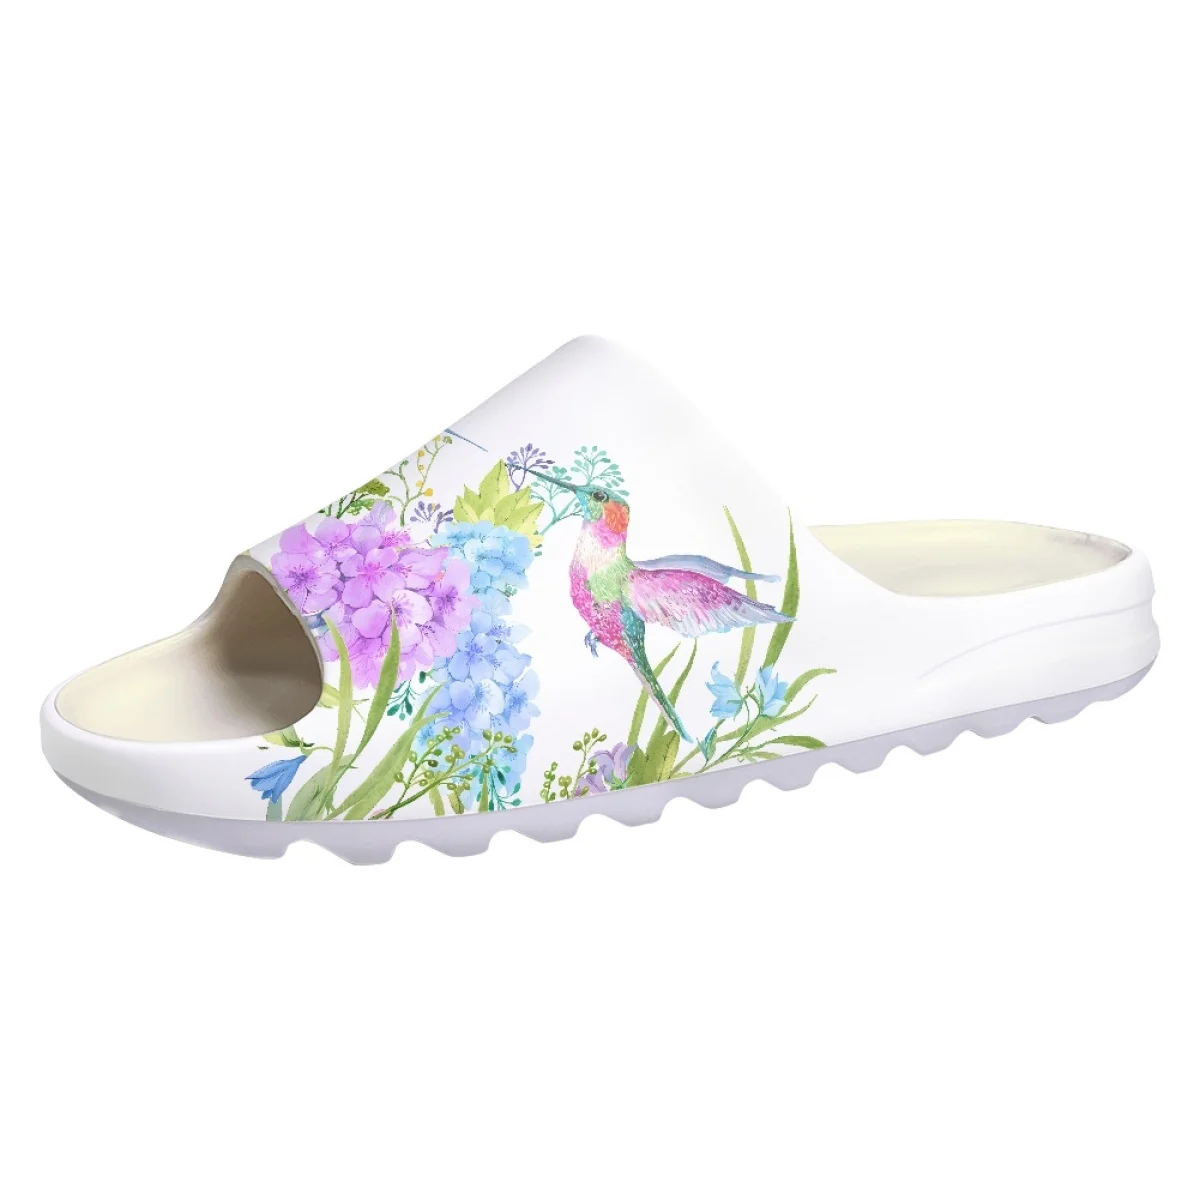 Hummingbird With Floral Print Luxury Design Outdoors Summer Slipper For Female Beach Student Kids Women Sandal Personalized Gift